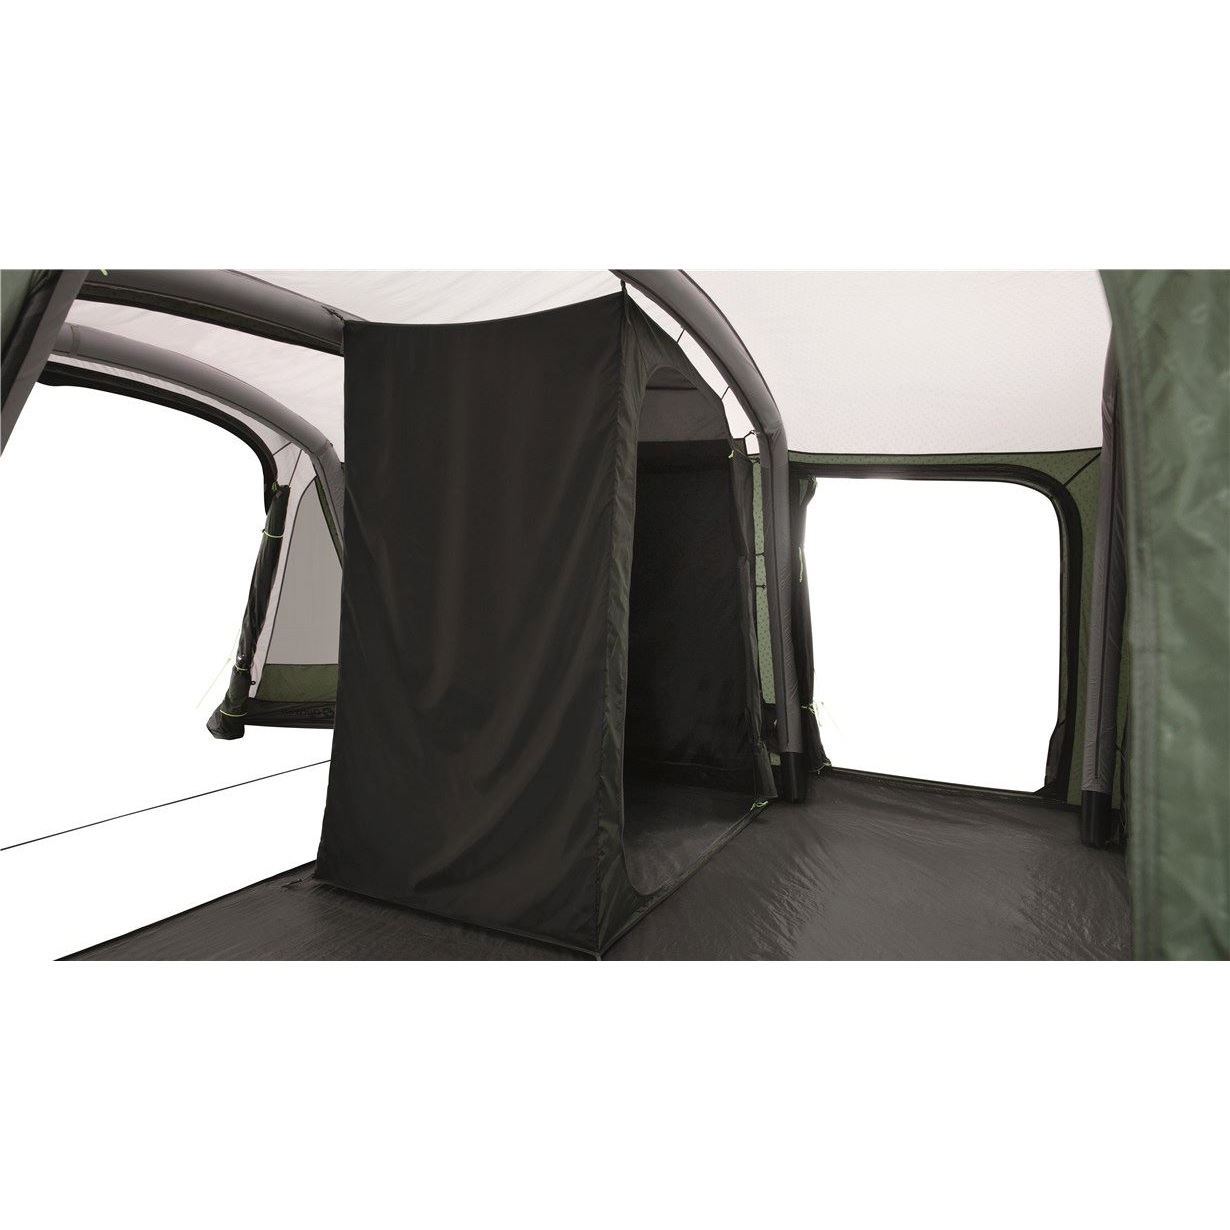 OUTWELL Zelt Queensdale 8PA - OASE OUTDOORS APS 111270